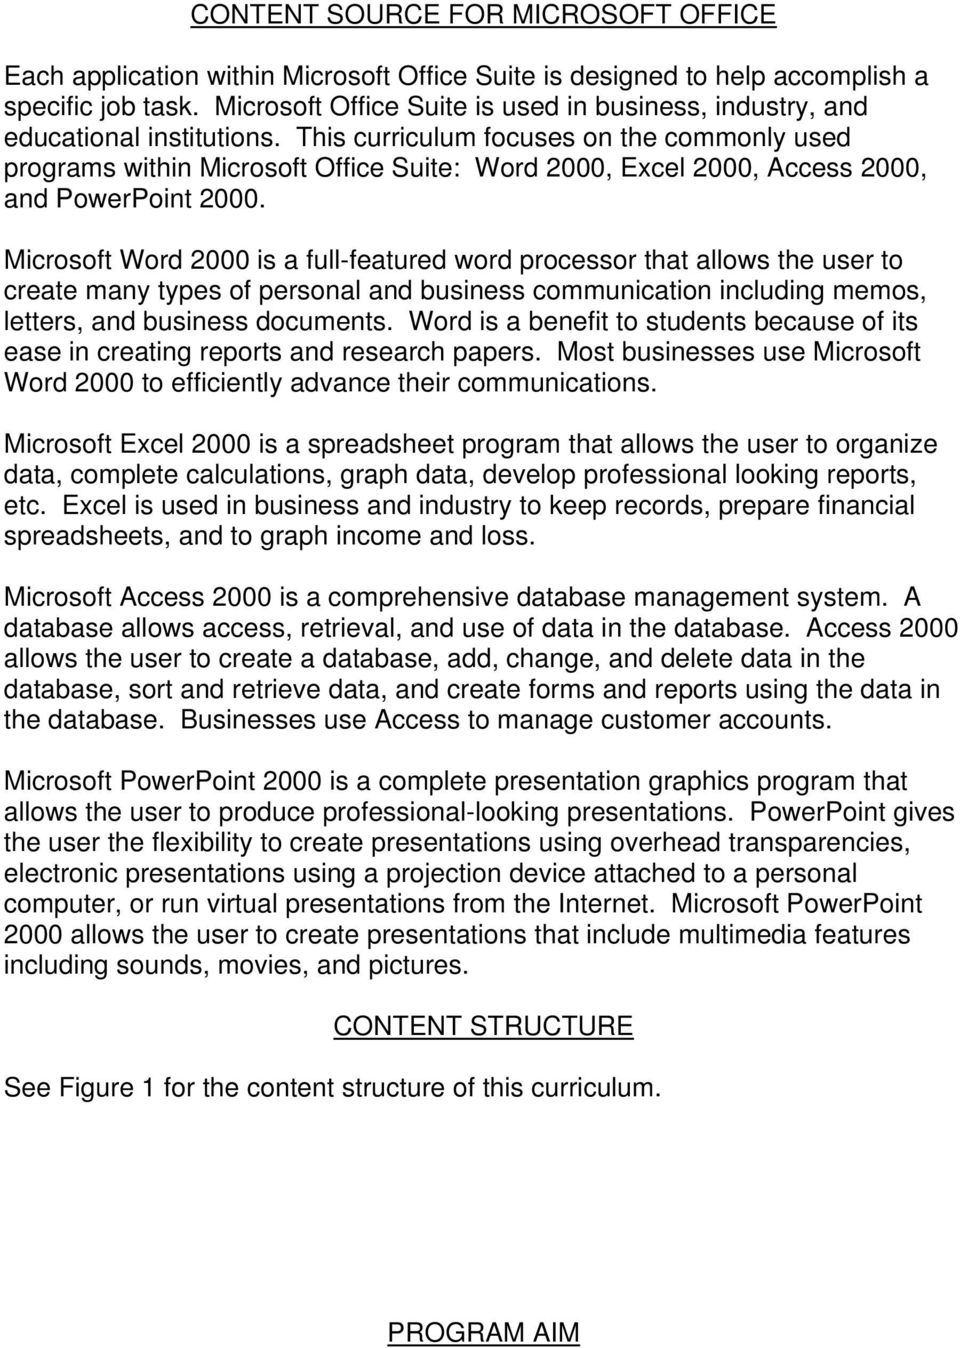 This curriculum focuses on the commonly used programs within Microsoft Office Suite: Word 2000, Excel 2000, Access 2000, and PowerPoint 2000.